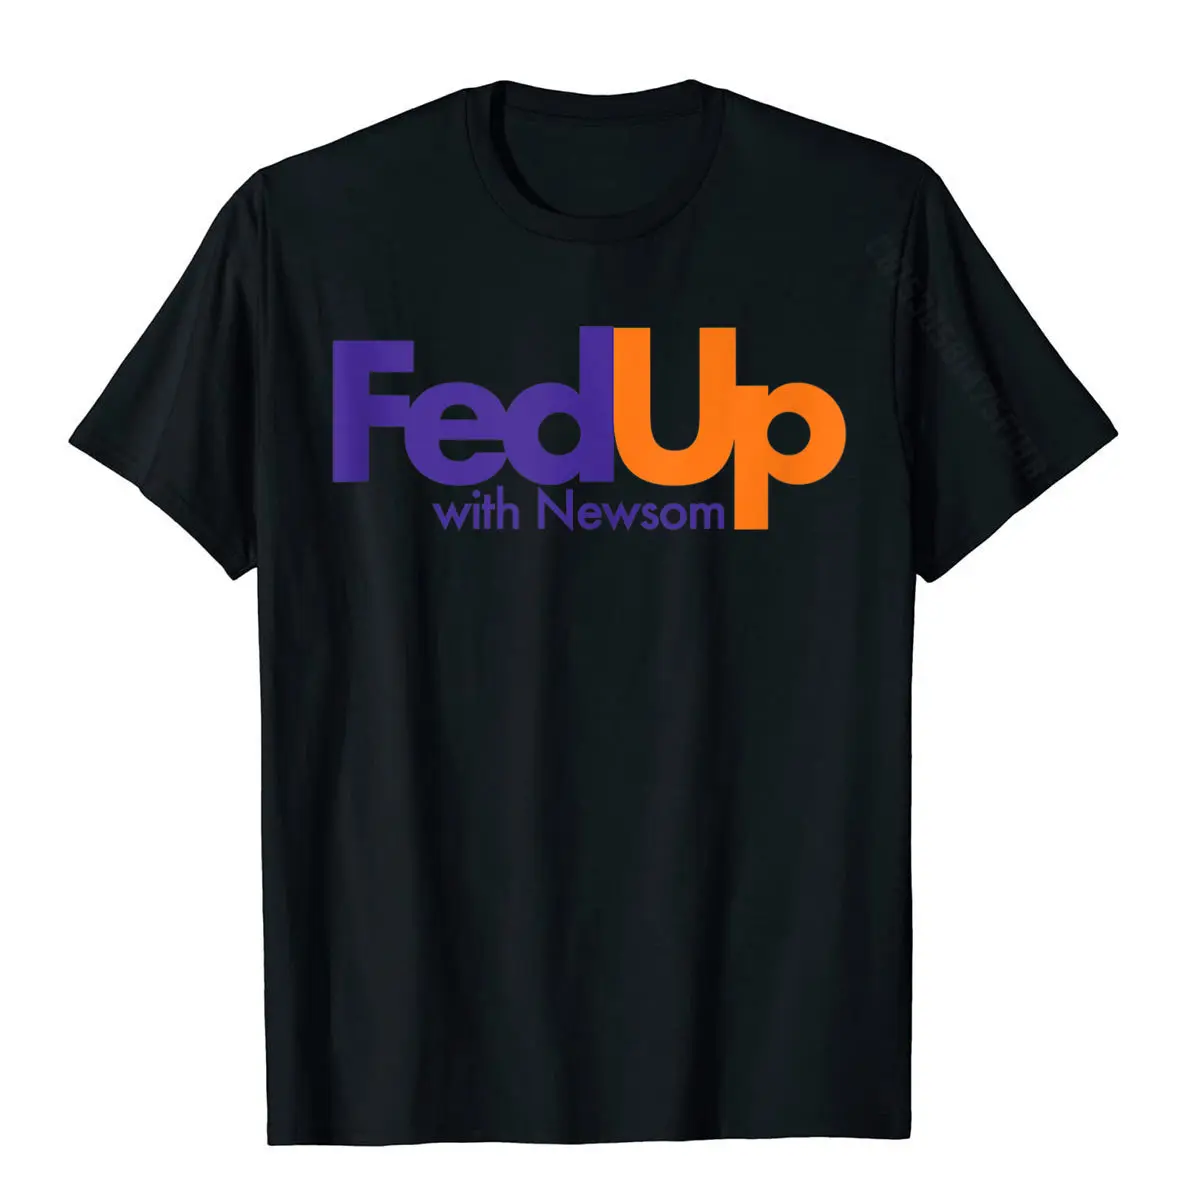 Fed Up With Newsom | Funny California Political Basic Top Graphic Men T Shirts Camisa Tops Shirt Cotton Print